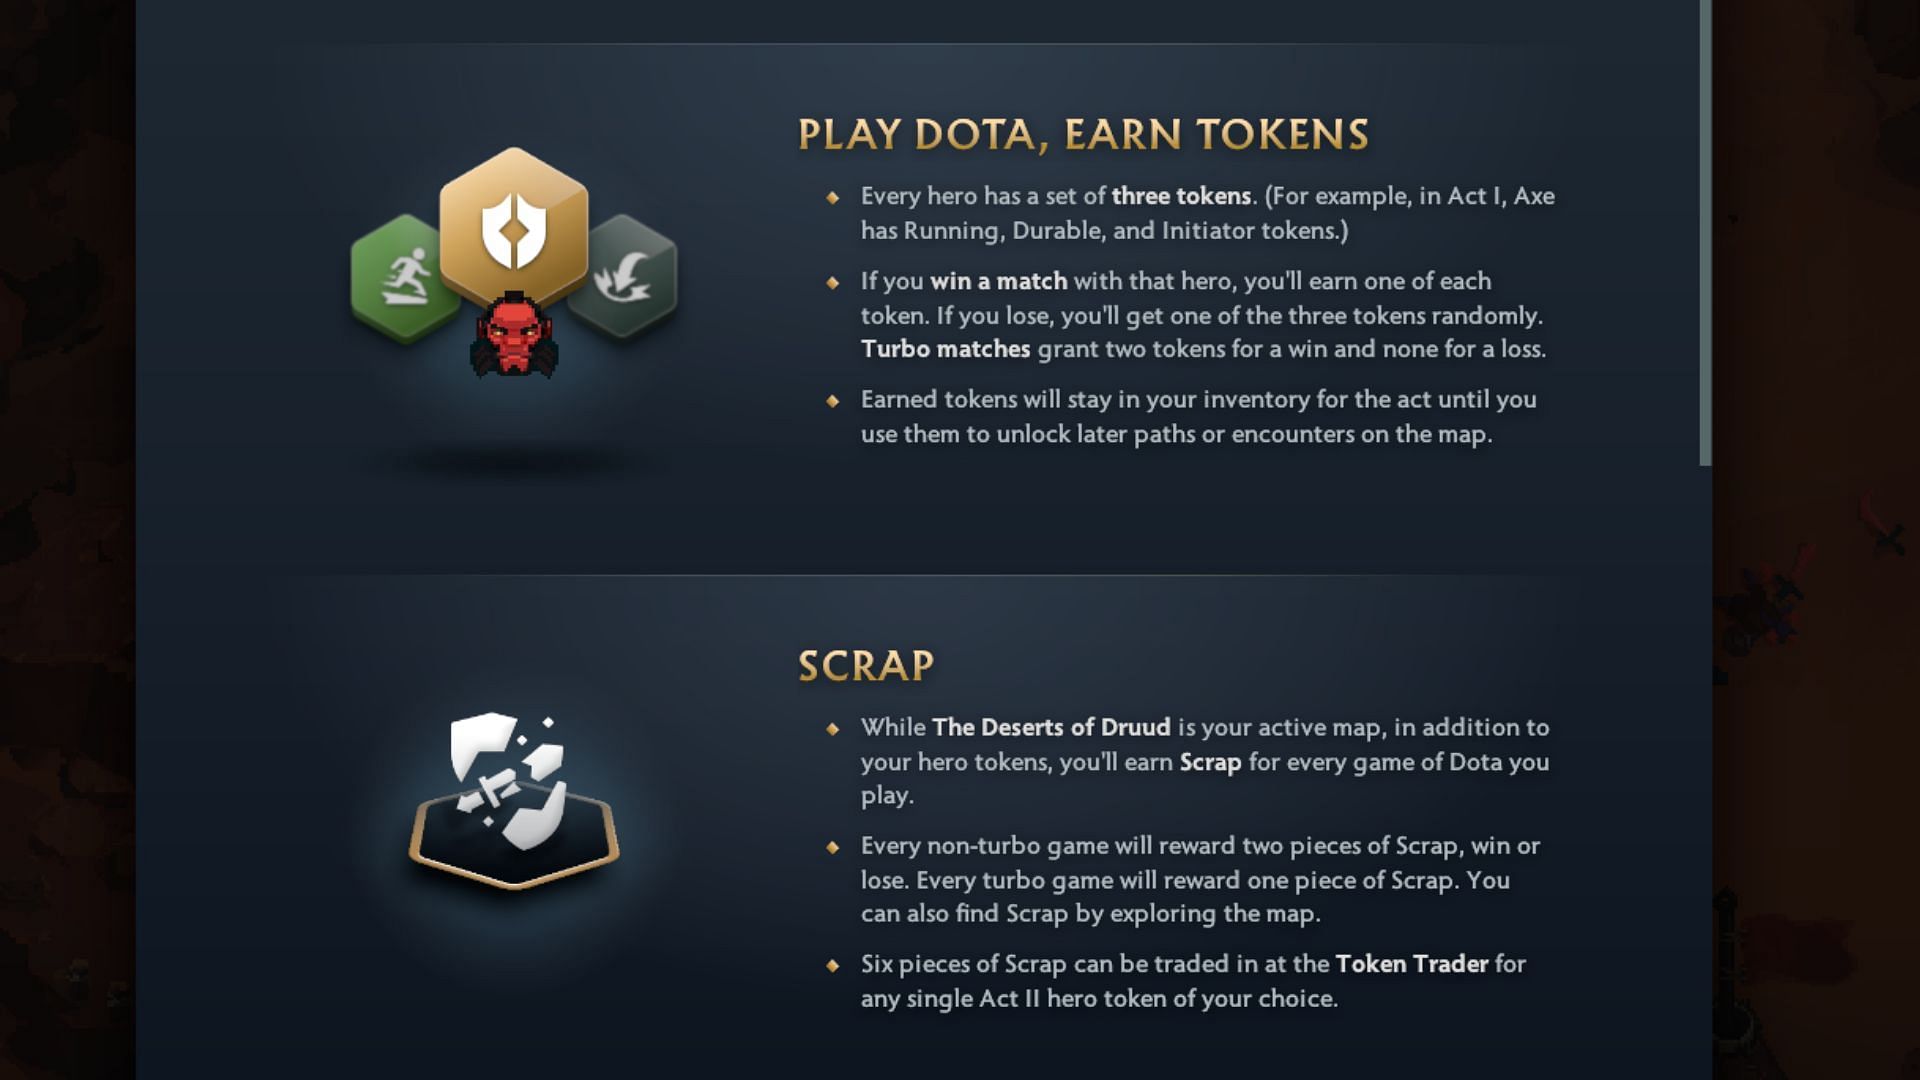 Trade the collected Scrap to earn Tokens (Image via Valve)